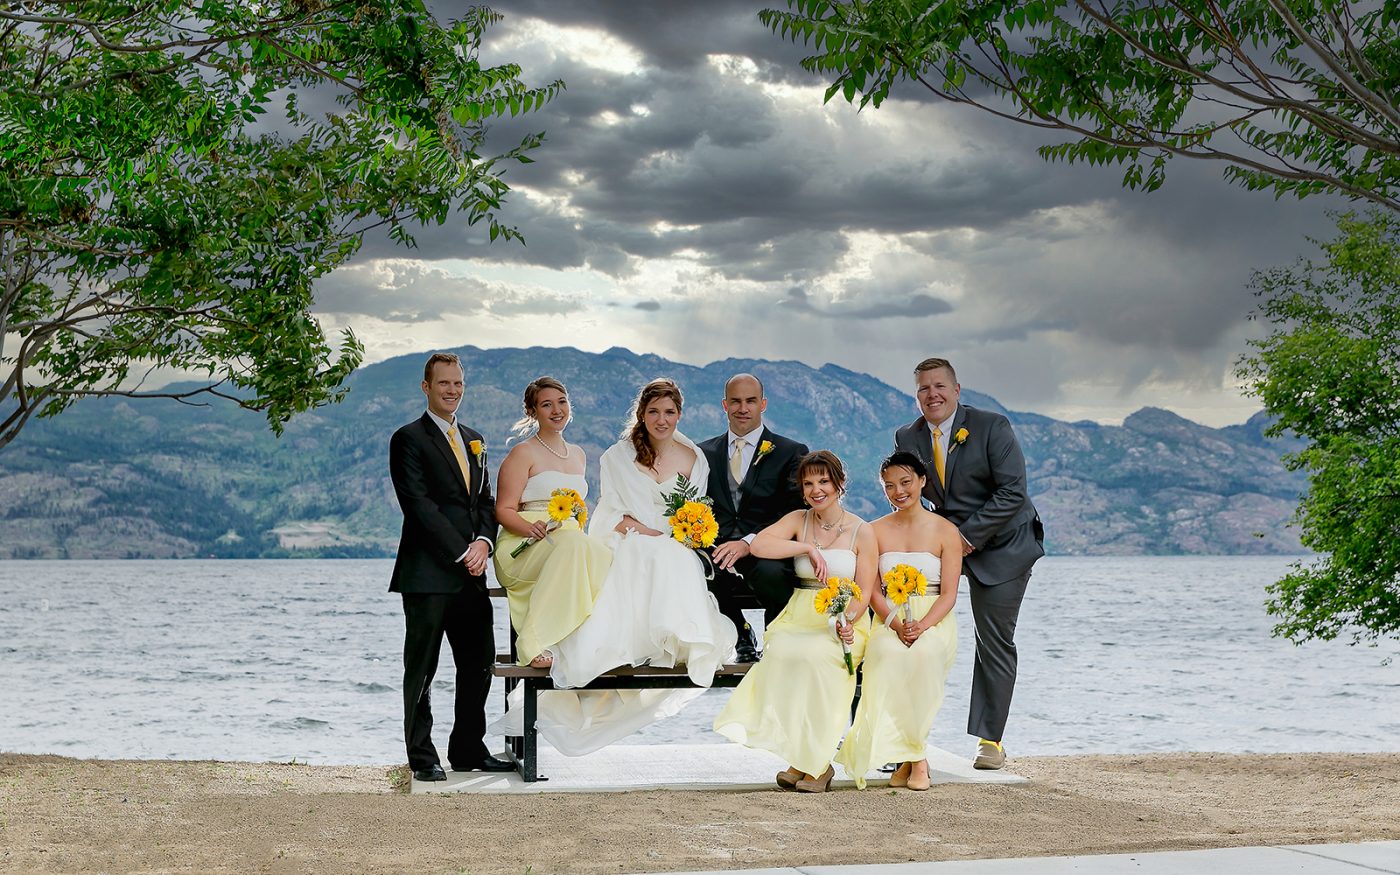 Bianca and Scott and their wedding party pose in front of Okanagan Lake